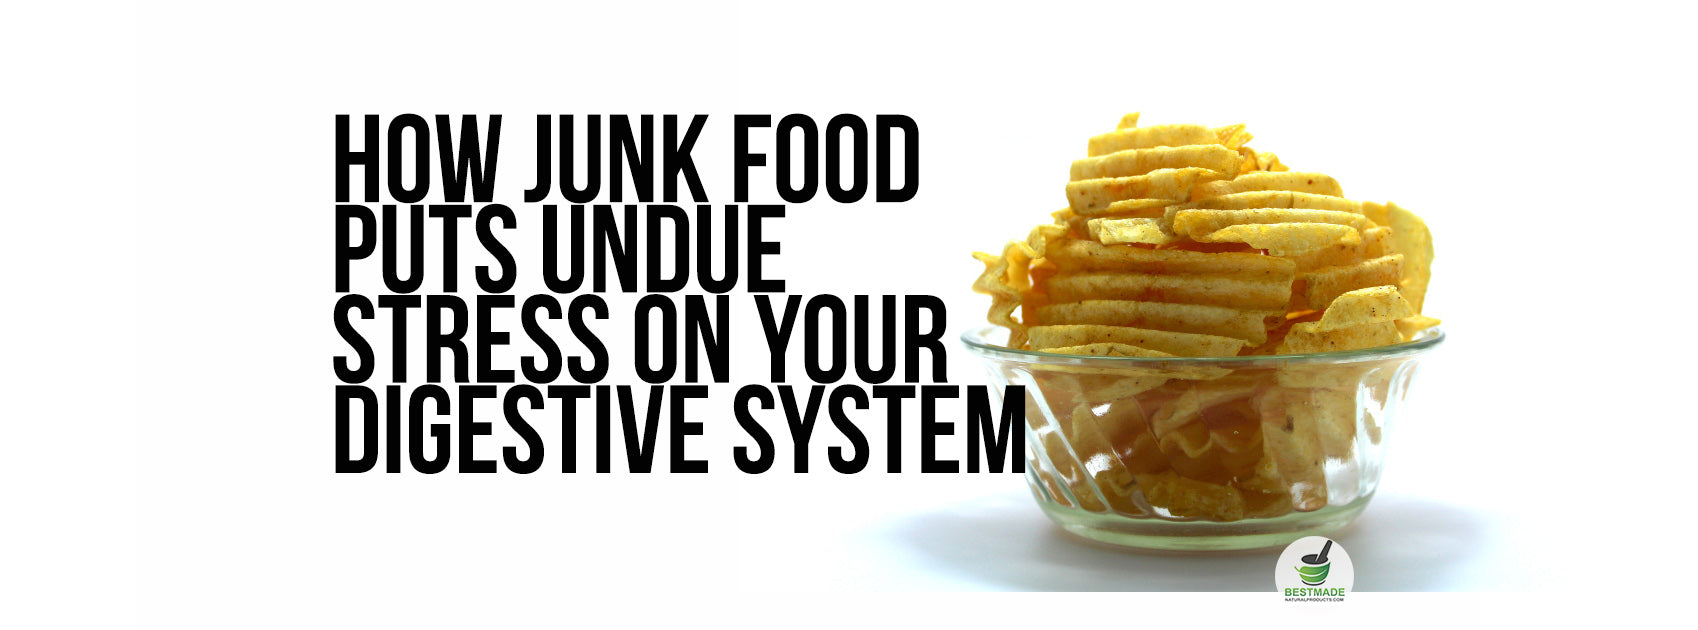 How Junk Food Puts Undue Stress On Your Digestive System